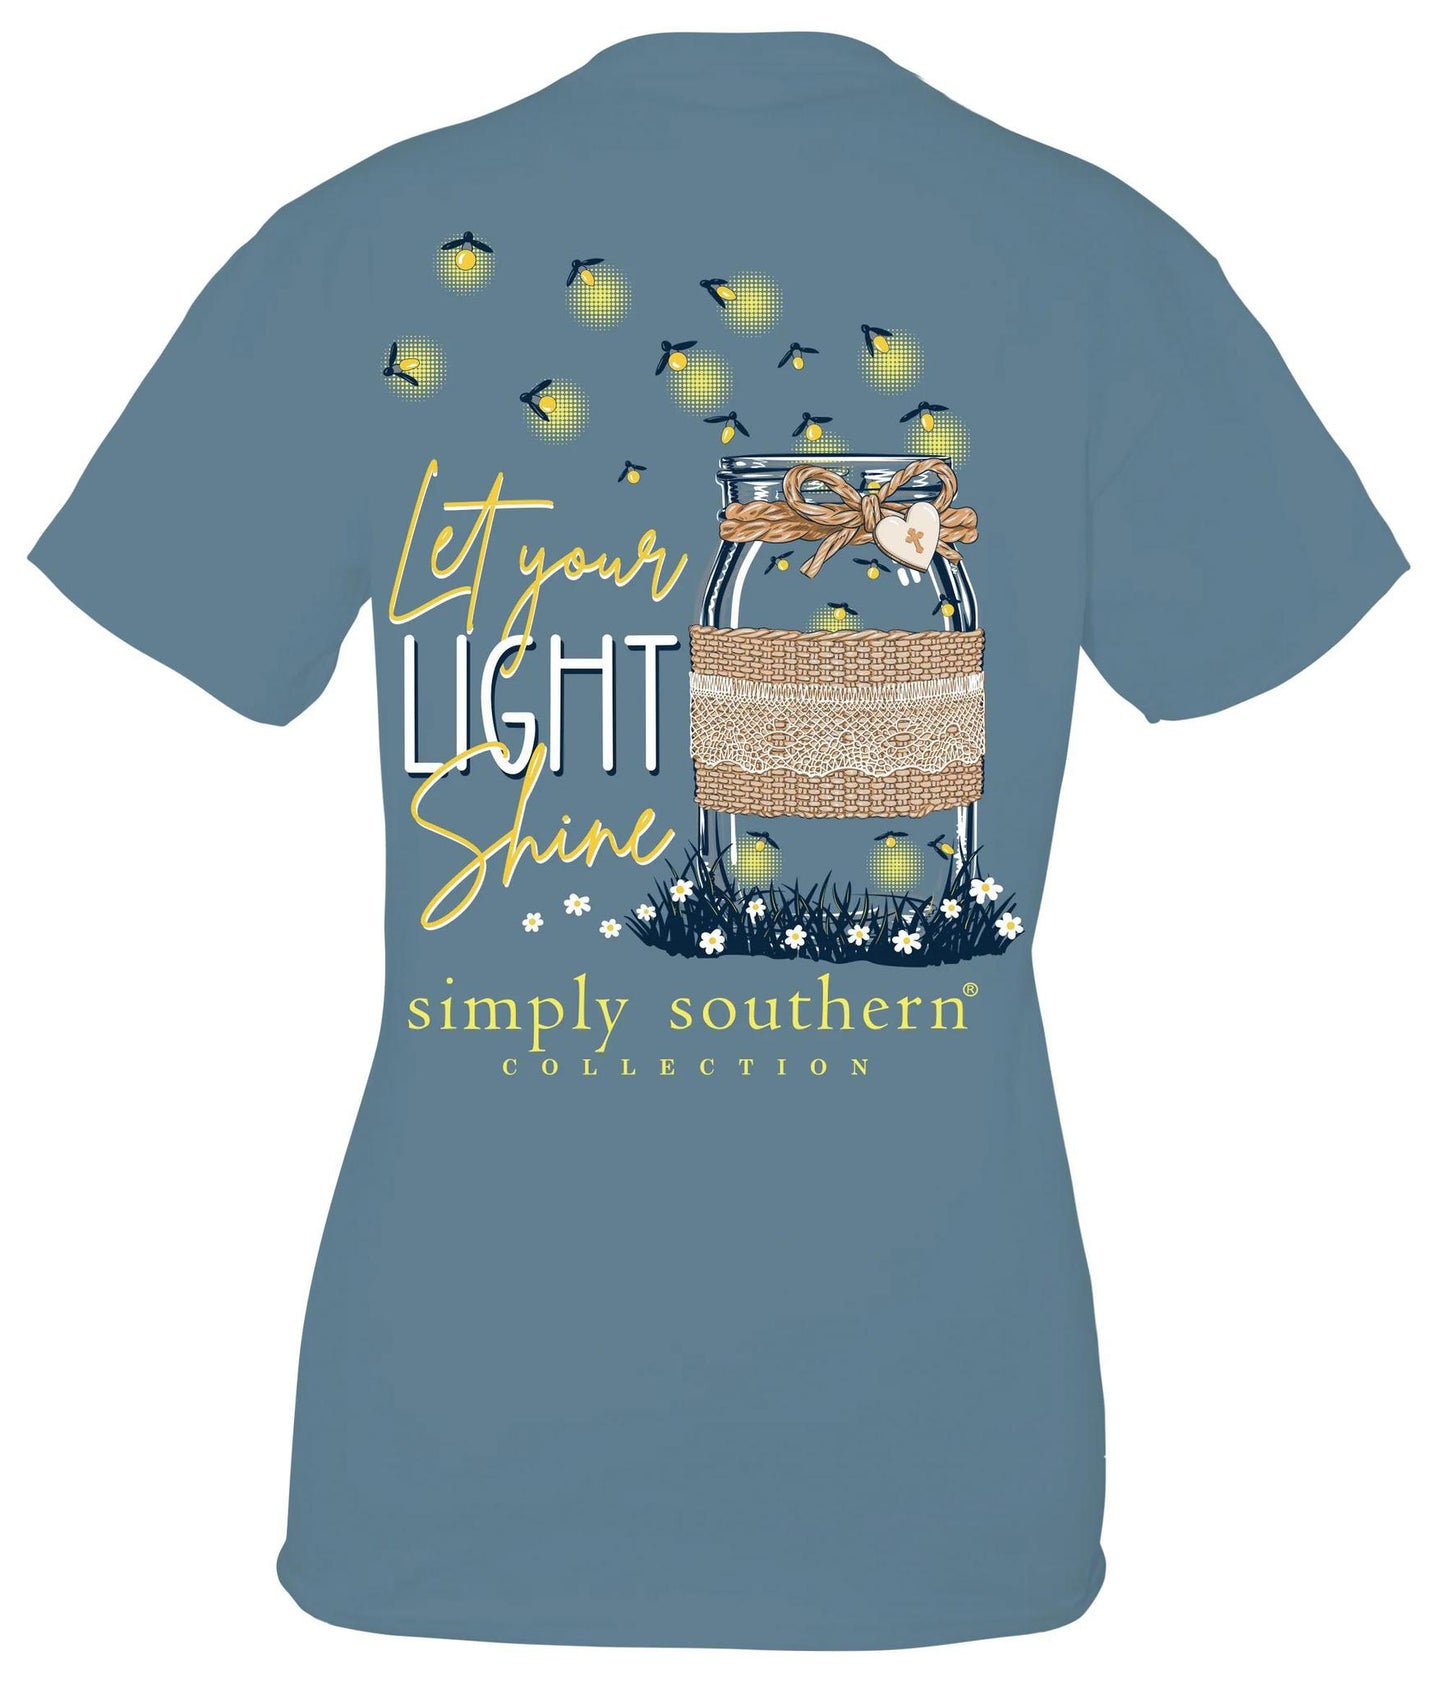 Simply Southern Short Sleeve Light Tee